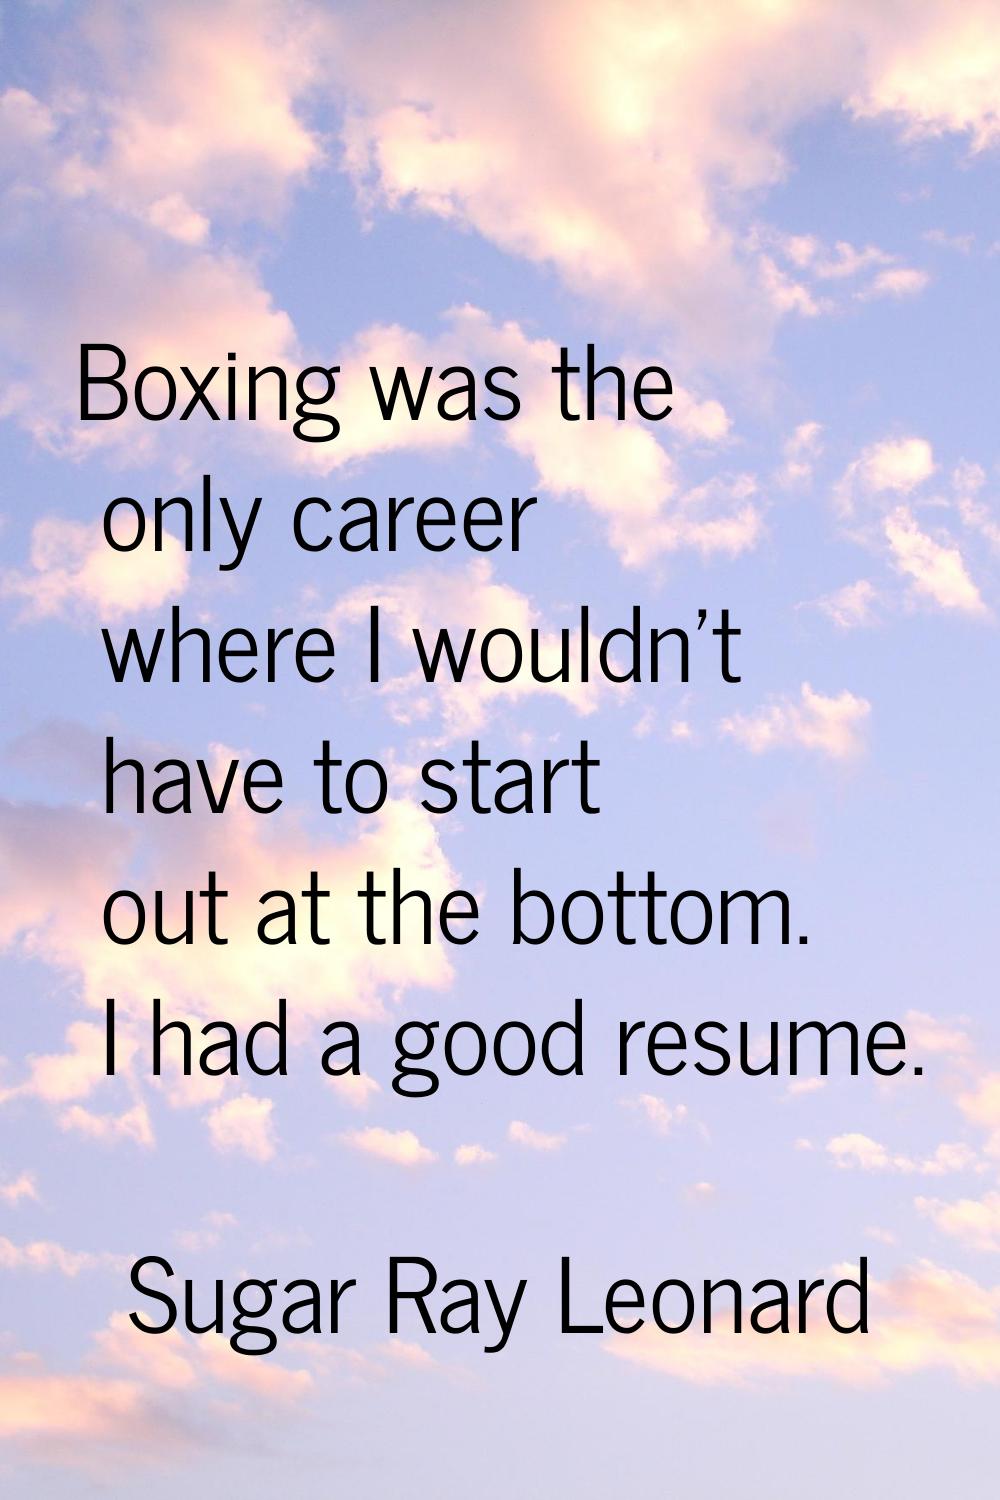 Boxing was the only career where I wouldn't have to start out at the bottom. I had a good resume.